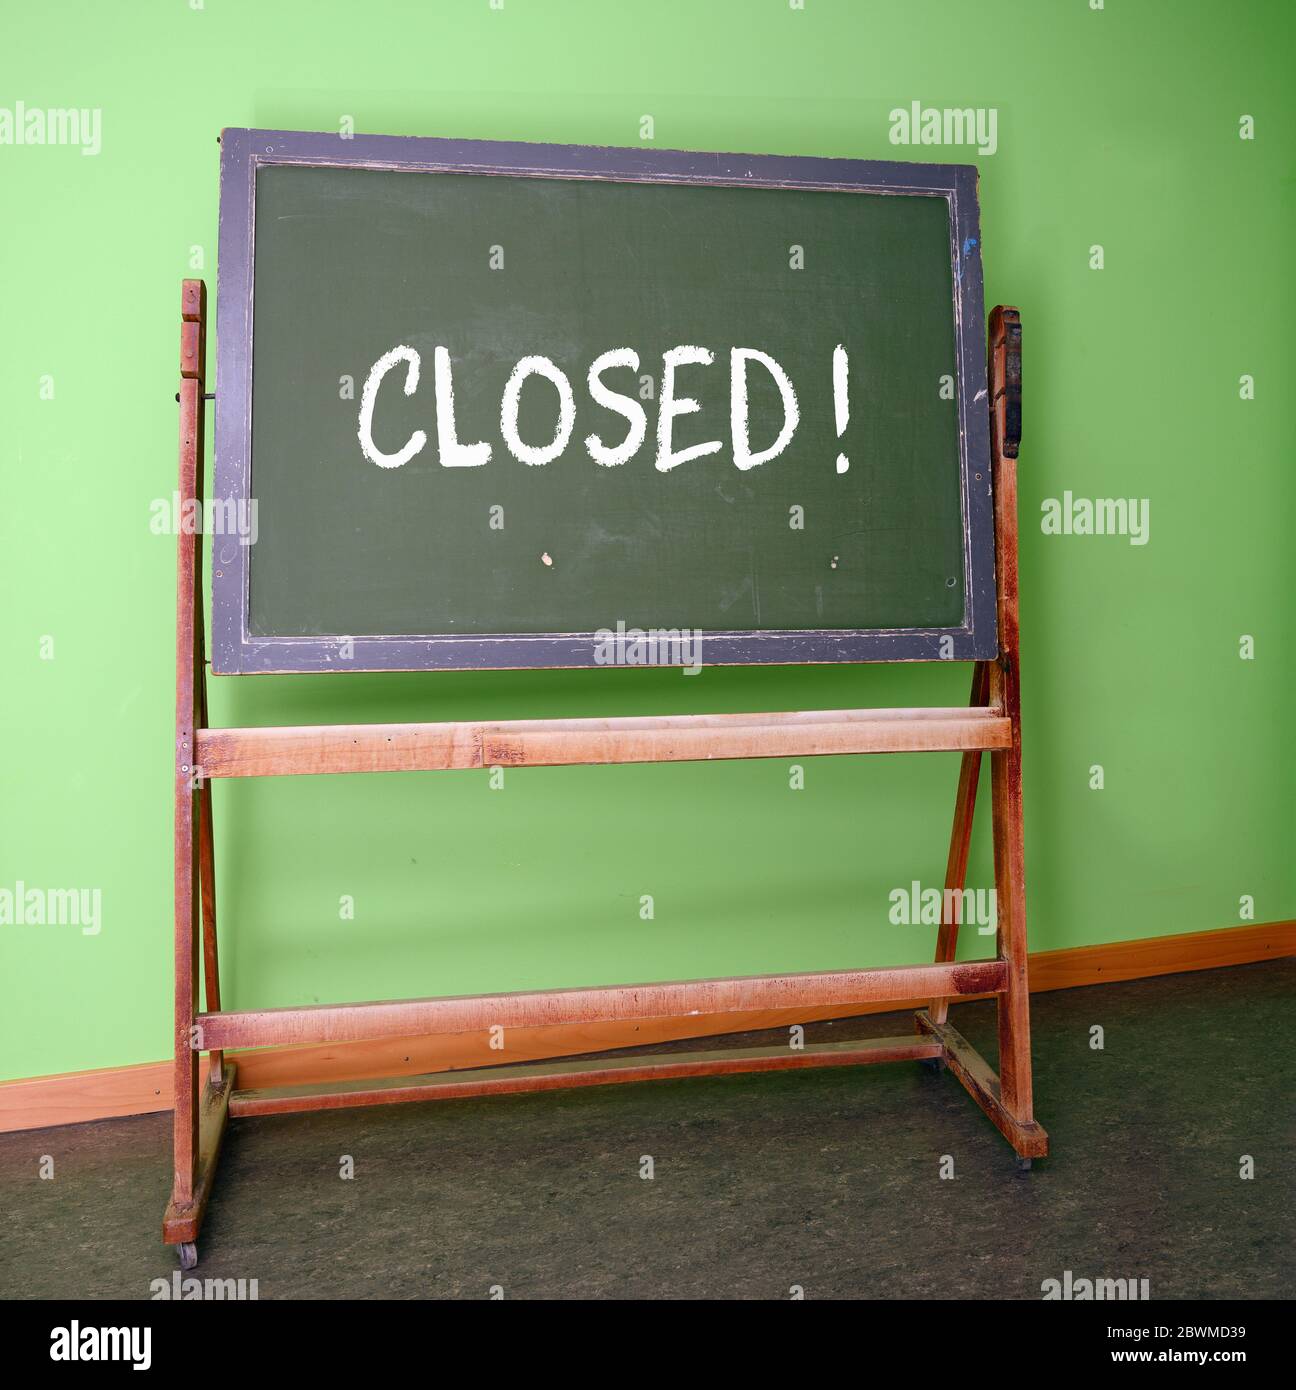 Closed written on an old school chalkboard to symbolize the closure of schools as preventive measure during the risk of infection with the curonavirus Stock Photo